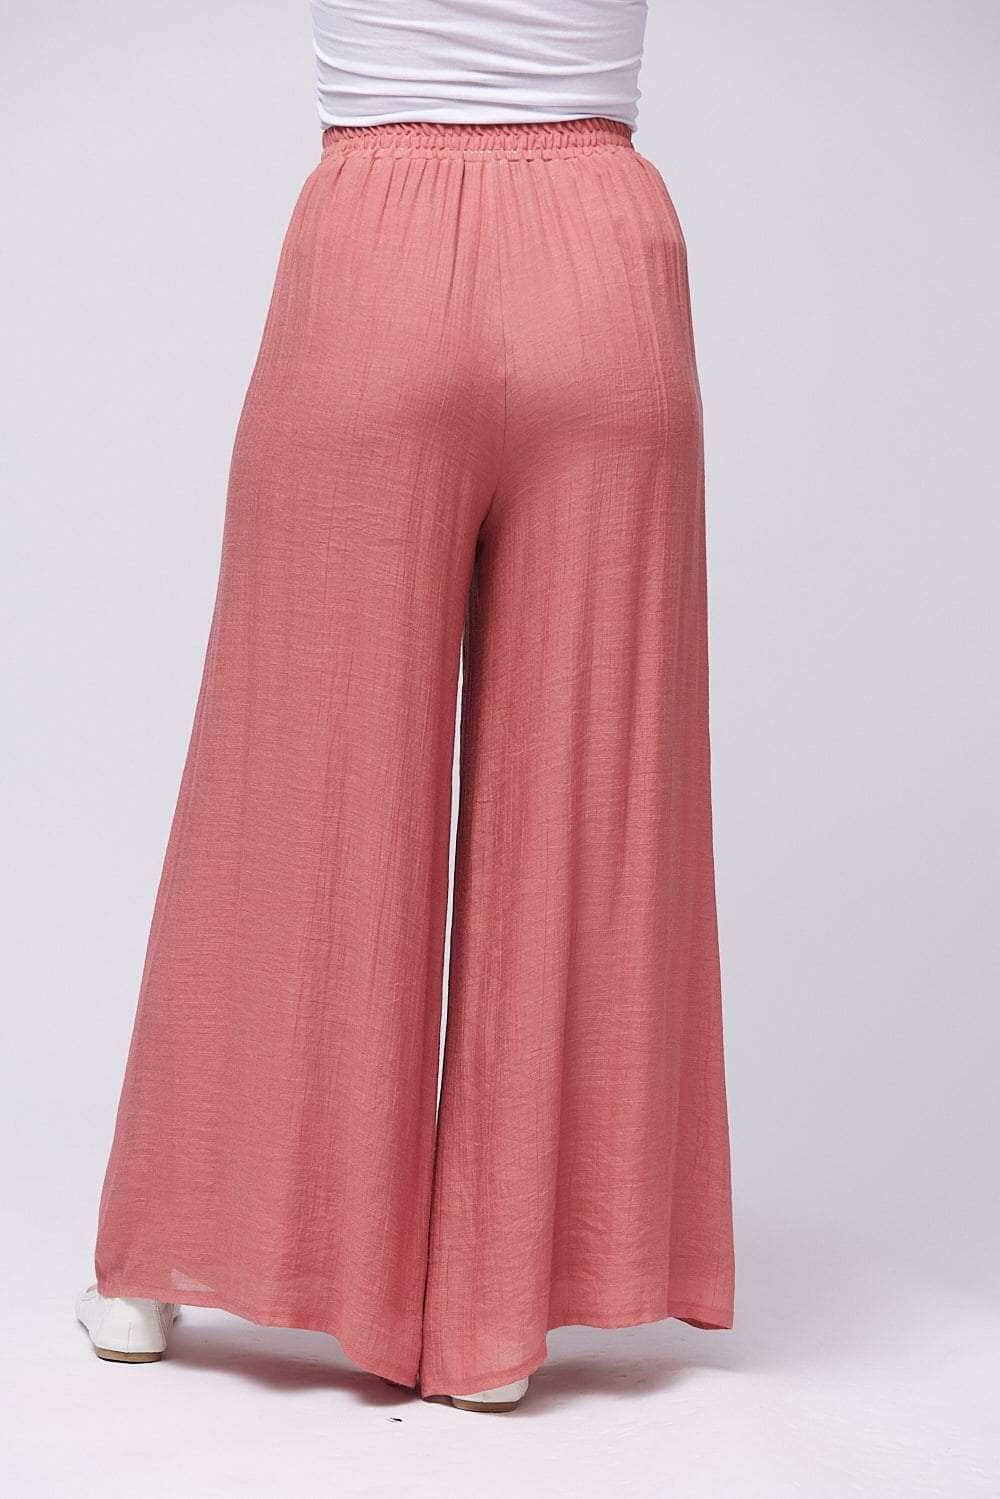 A2 Trousers Saloos Double Layer Wide Leg Floaty Trousers